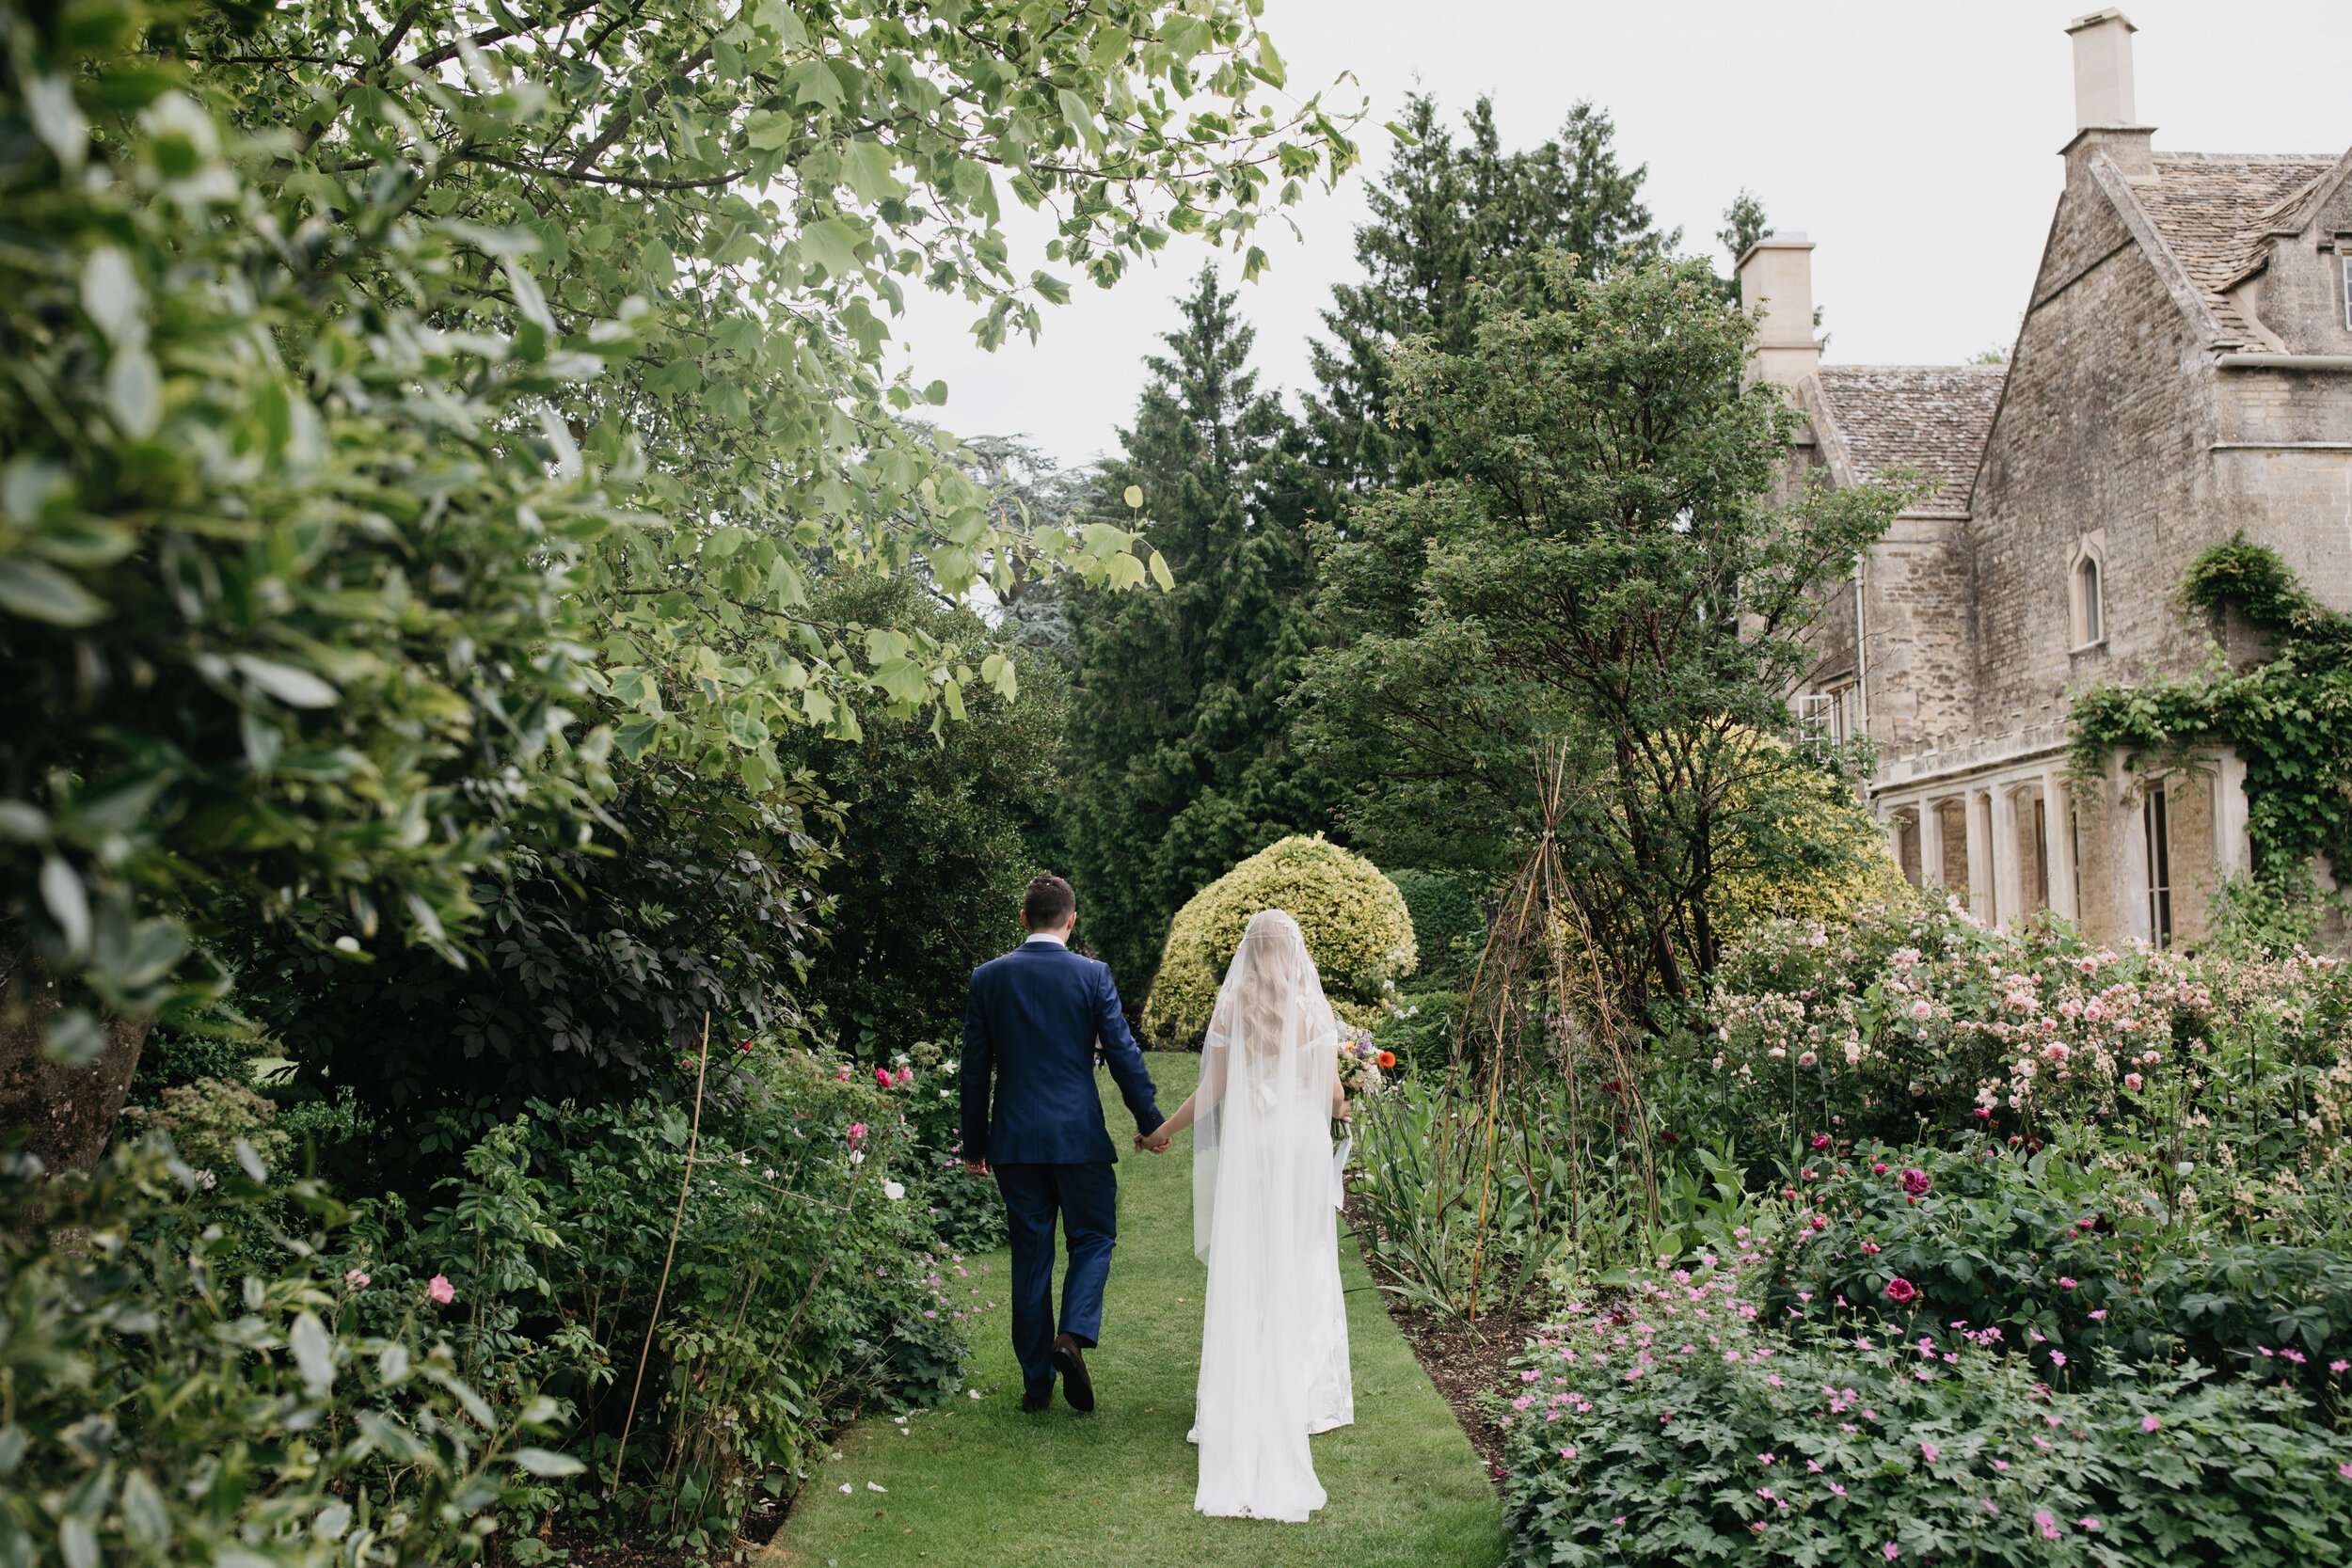 Beautiful bride Sophie wore a wedding dress and veil by Halfpenny London